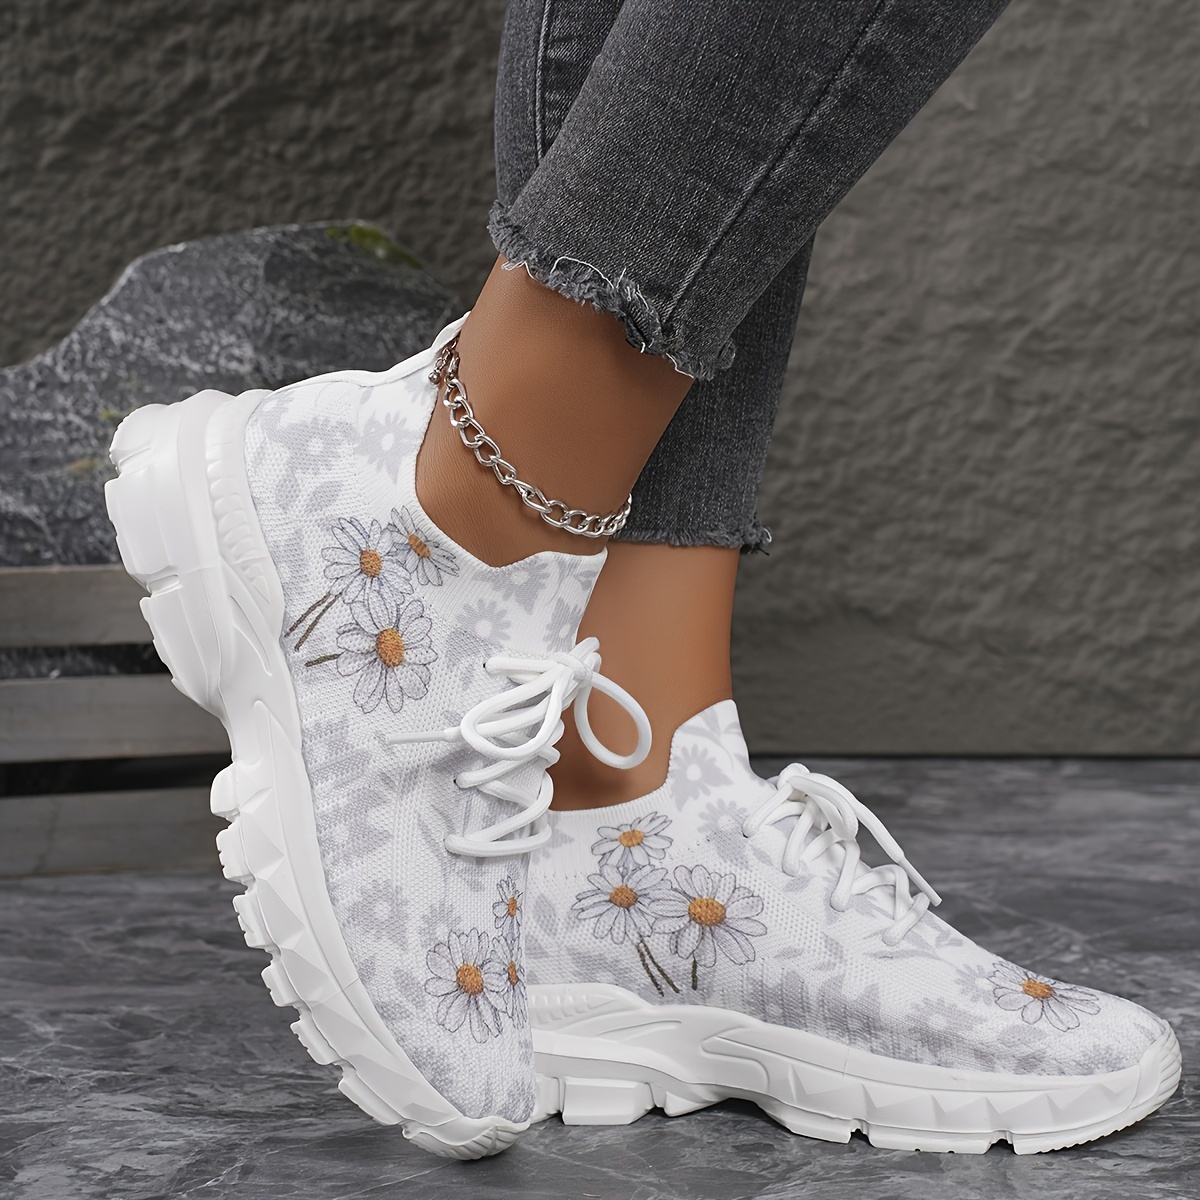 

Women's Fashion Sneakers, Daisy Print Athletic Shoes, Casual Floral Lace-up Sport Shoes, Comfortable & Lightweight Running Footwear